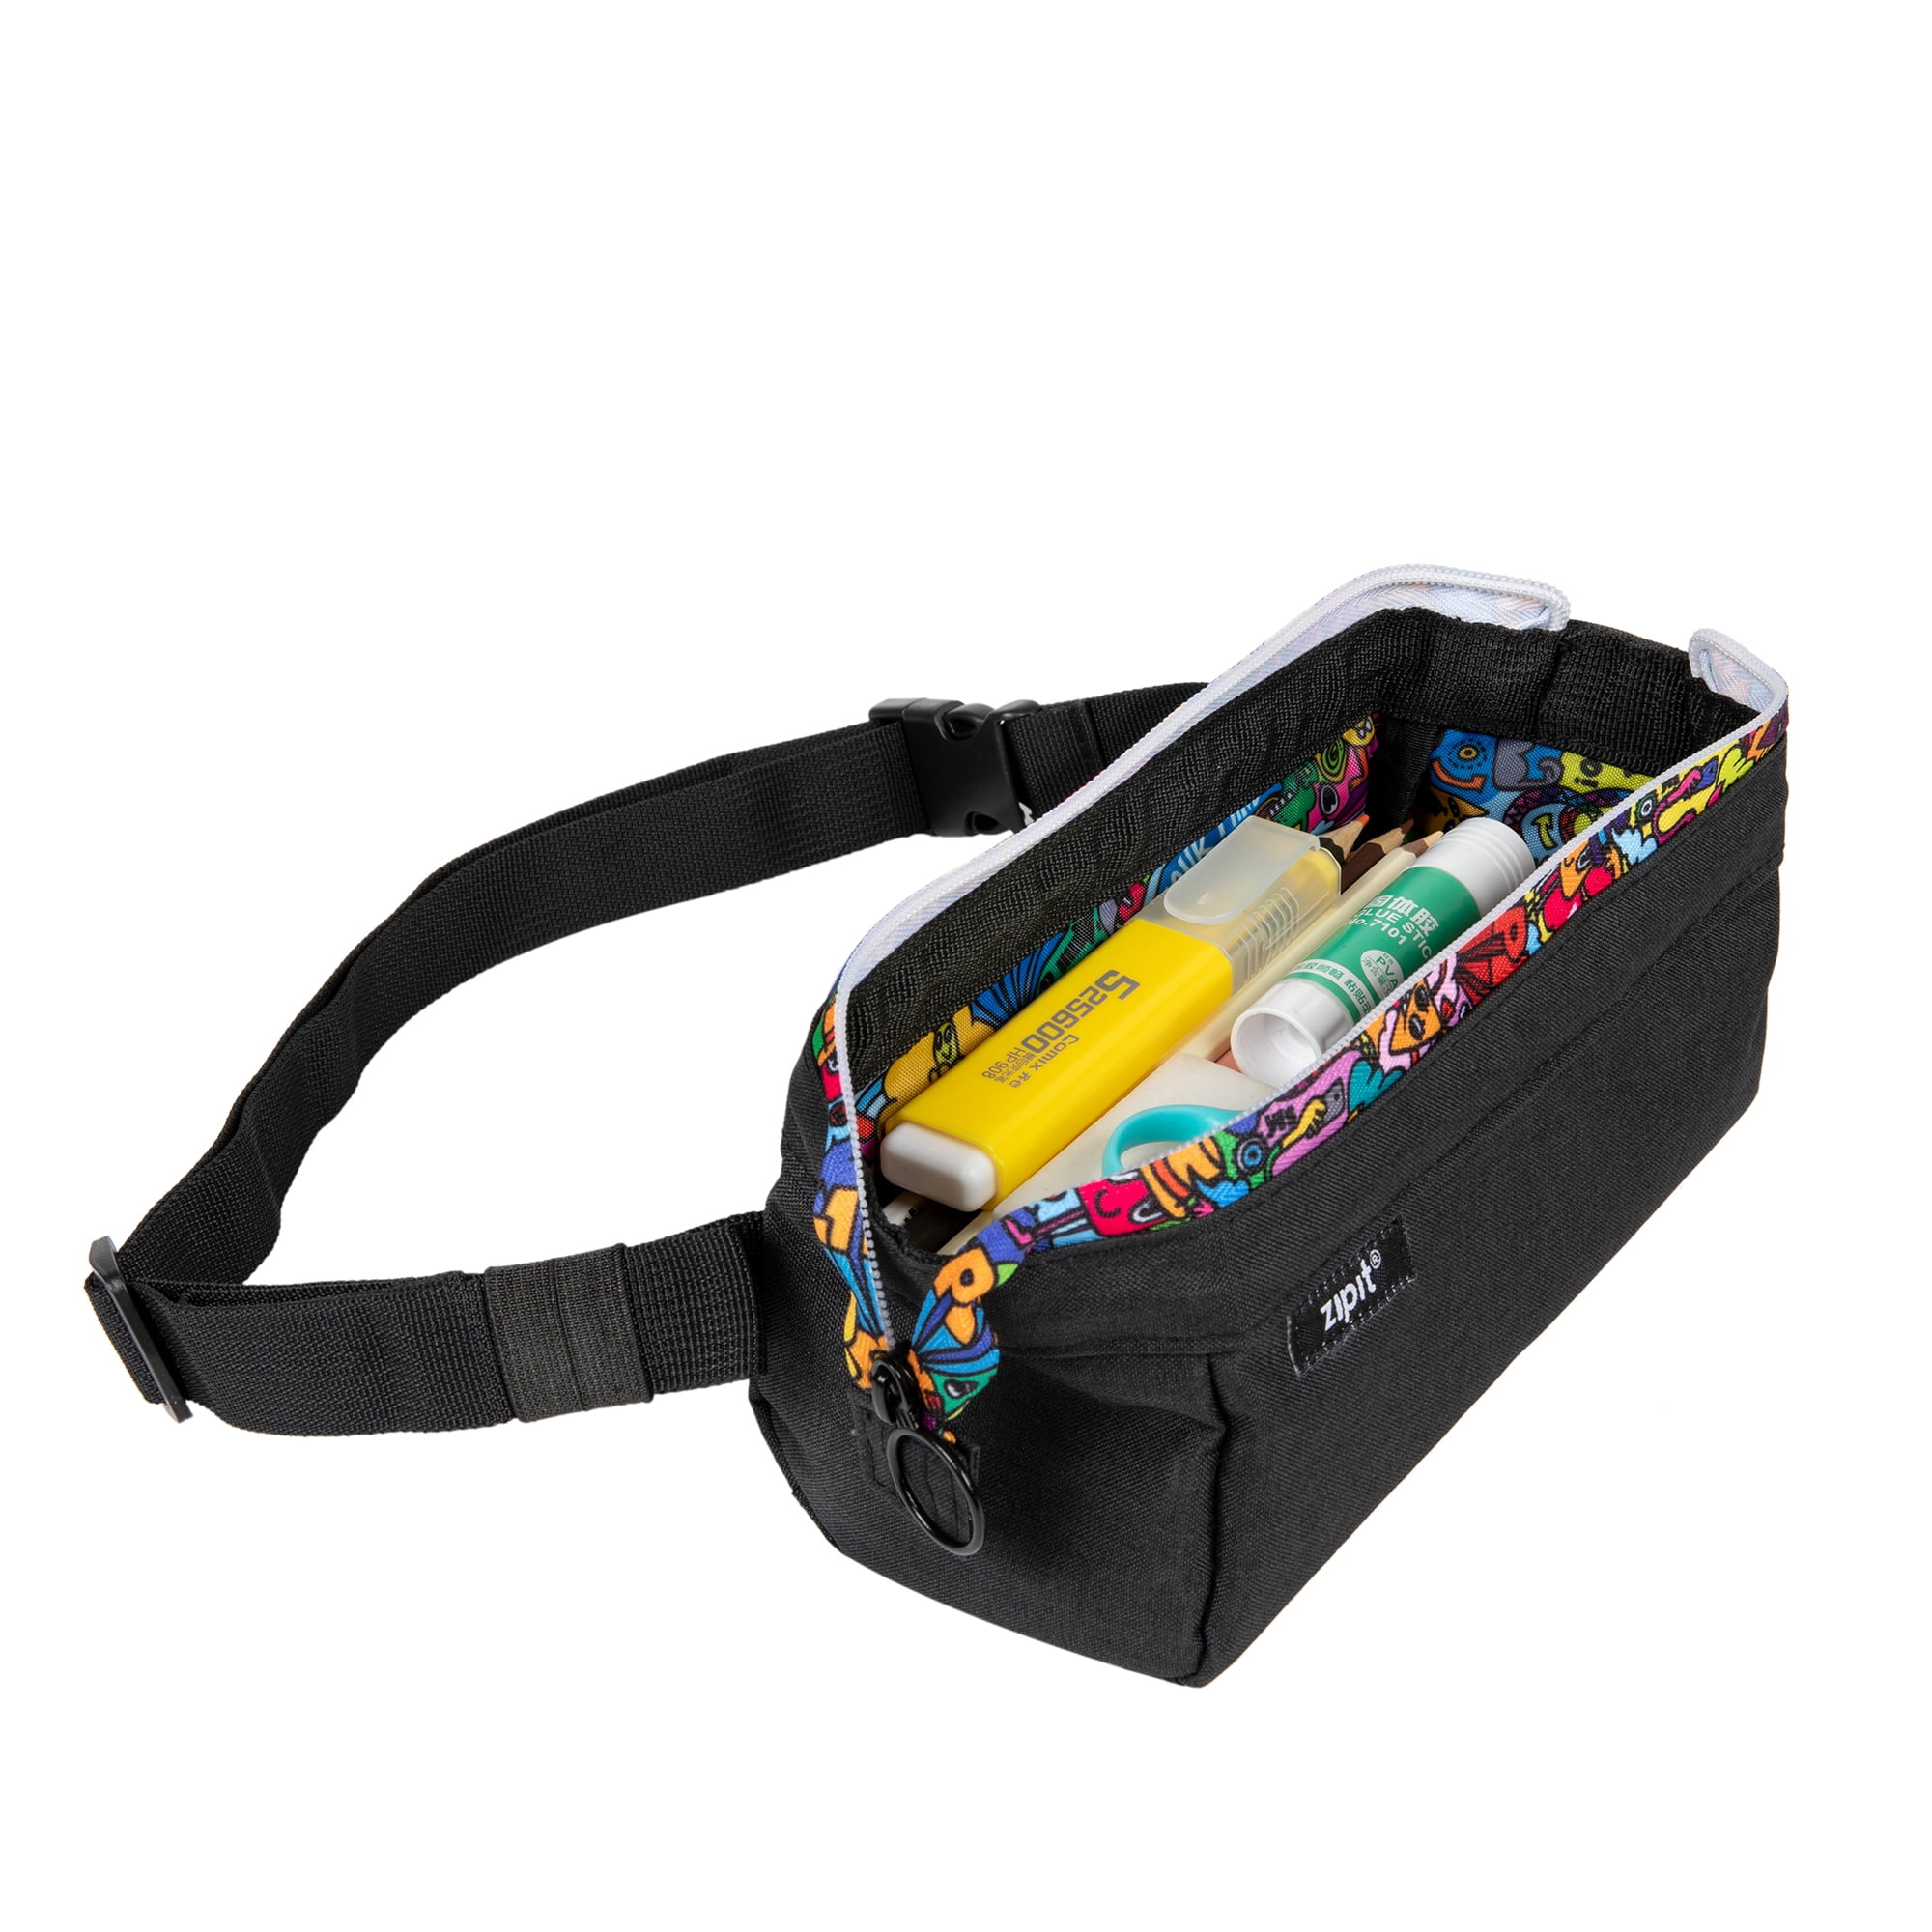 ZIPIT Lenny Pencil Case, Waistband Binder Pouch, Hip Pouch for